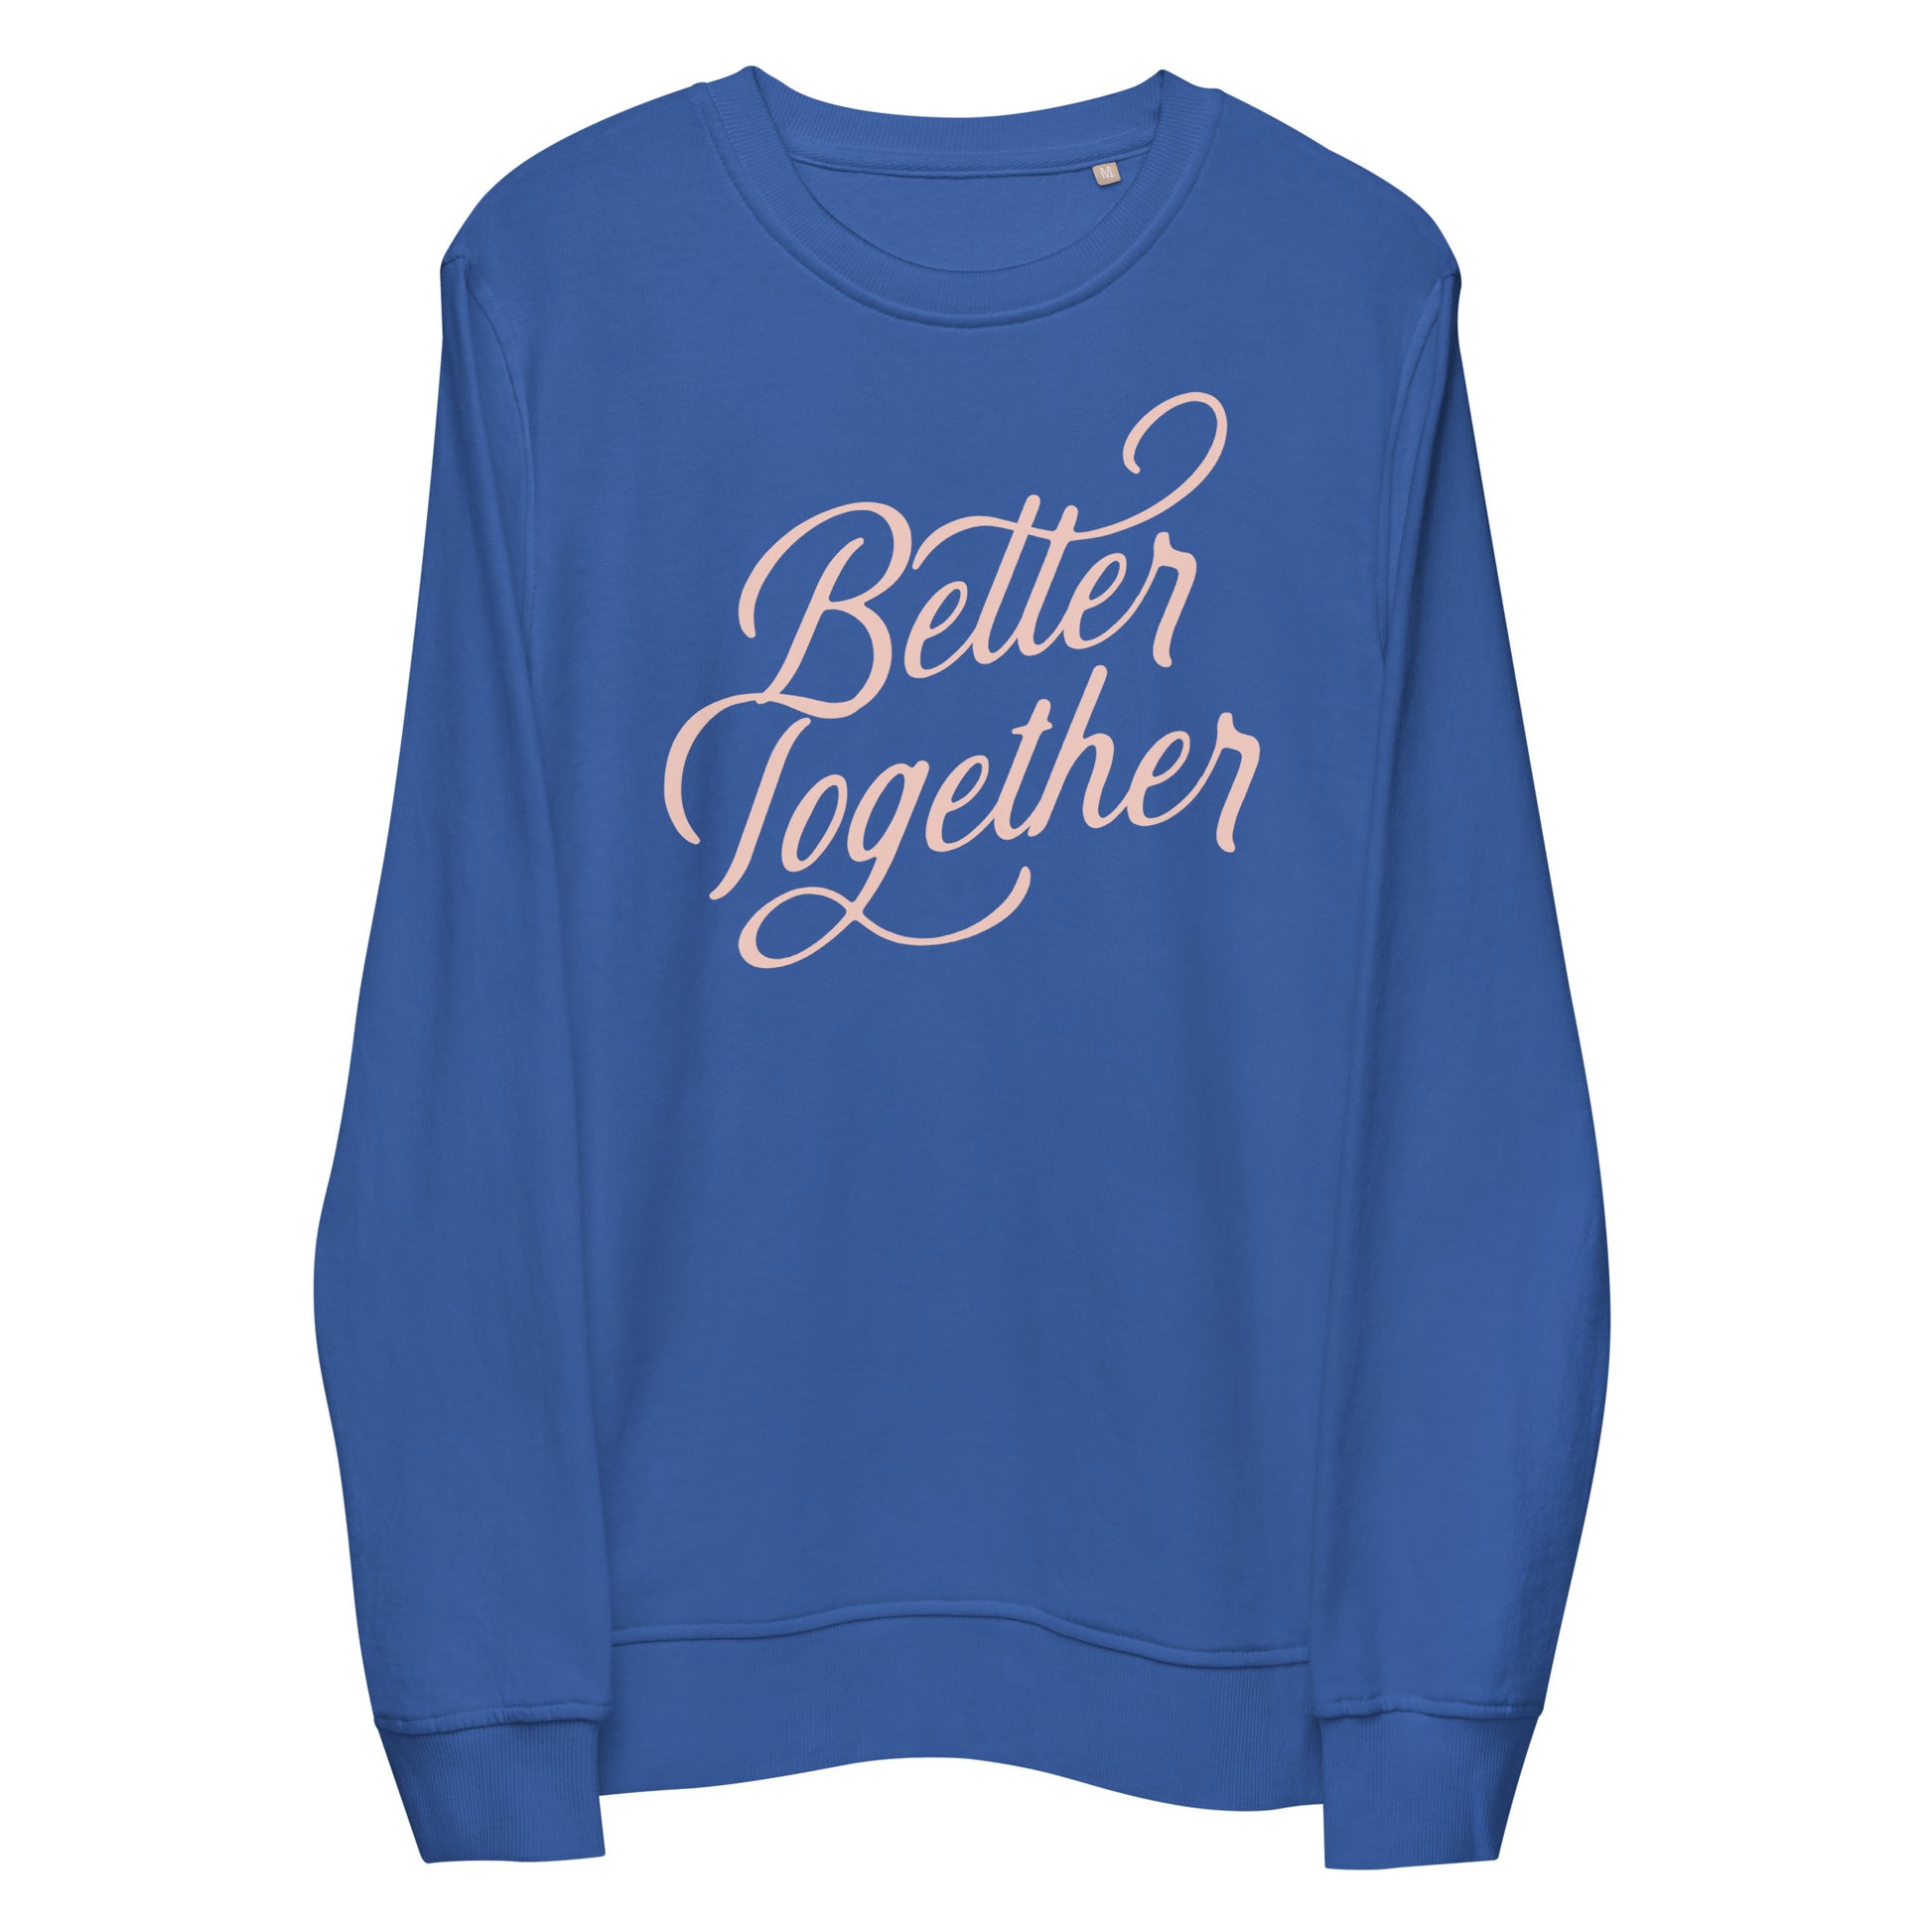 Better Together Sweatshirt to wear with your best friends at girls night